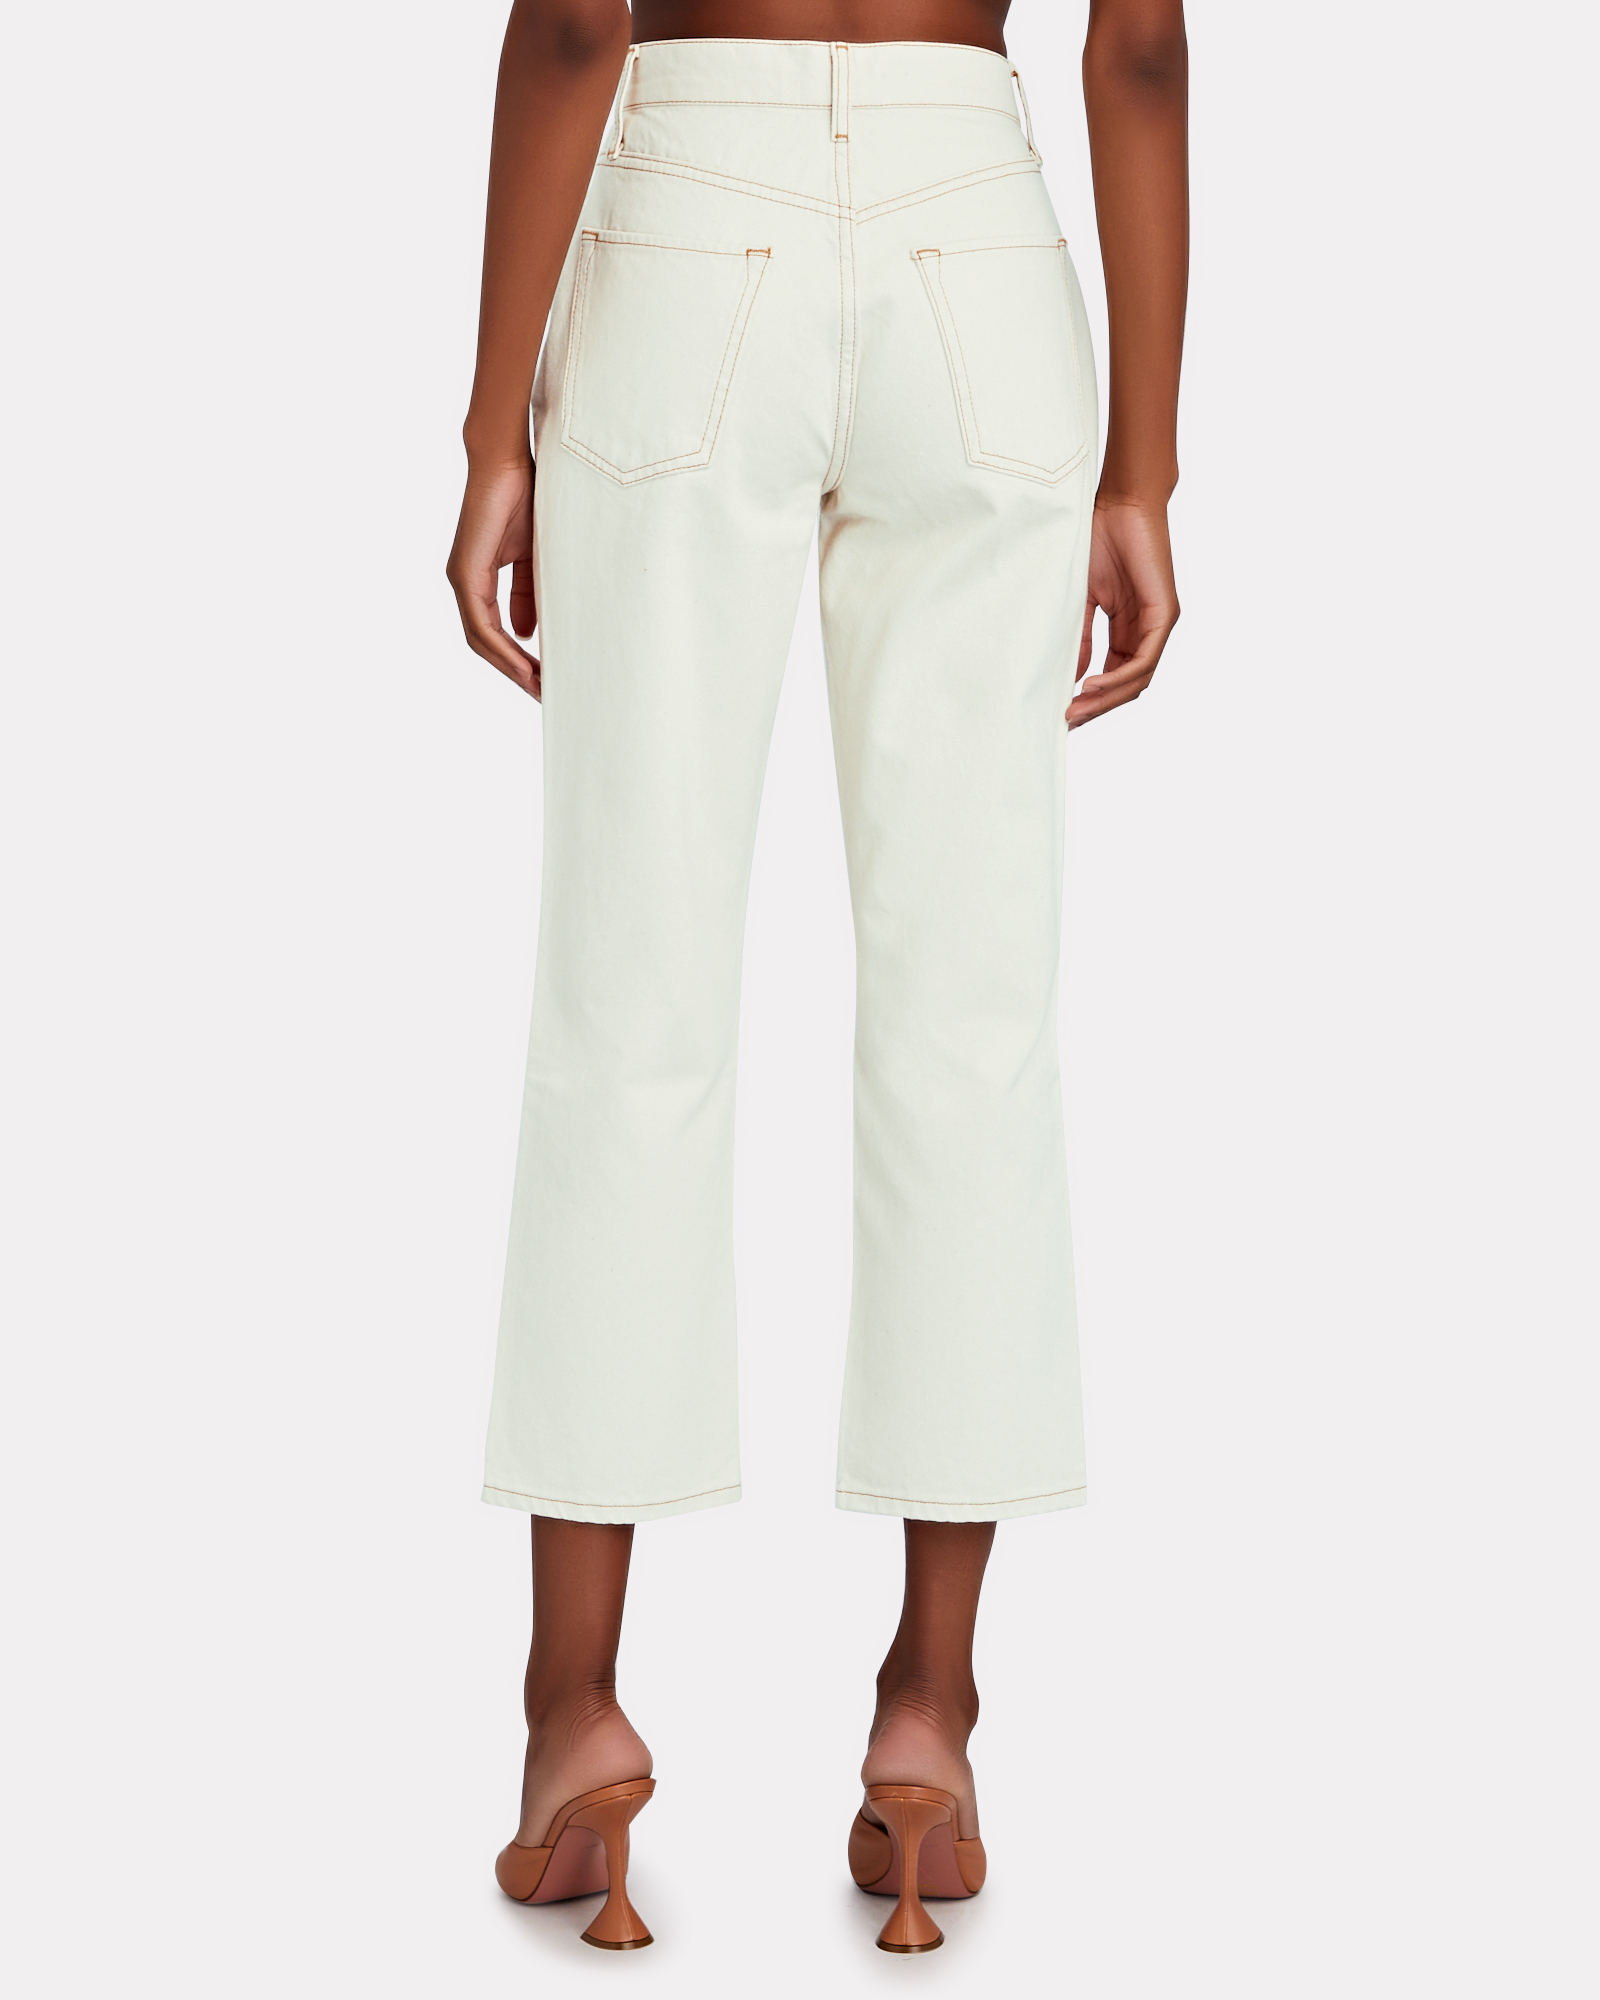 Triarchy Ms. Highsmith Jeans In White | INTERMIX®